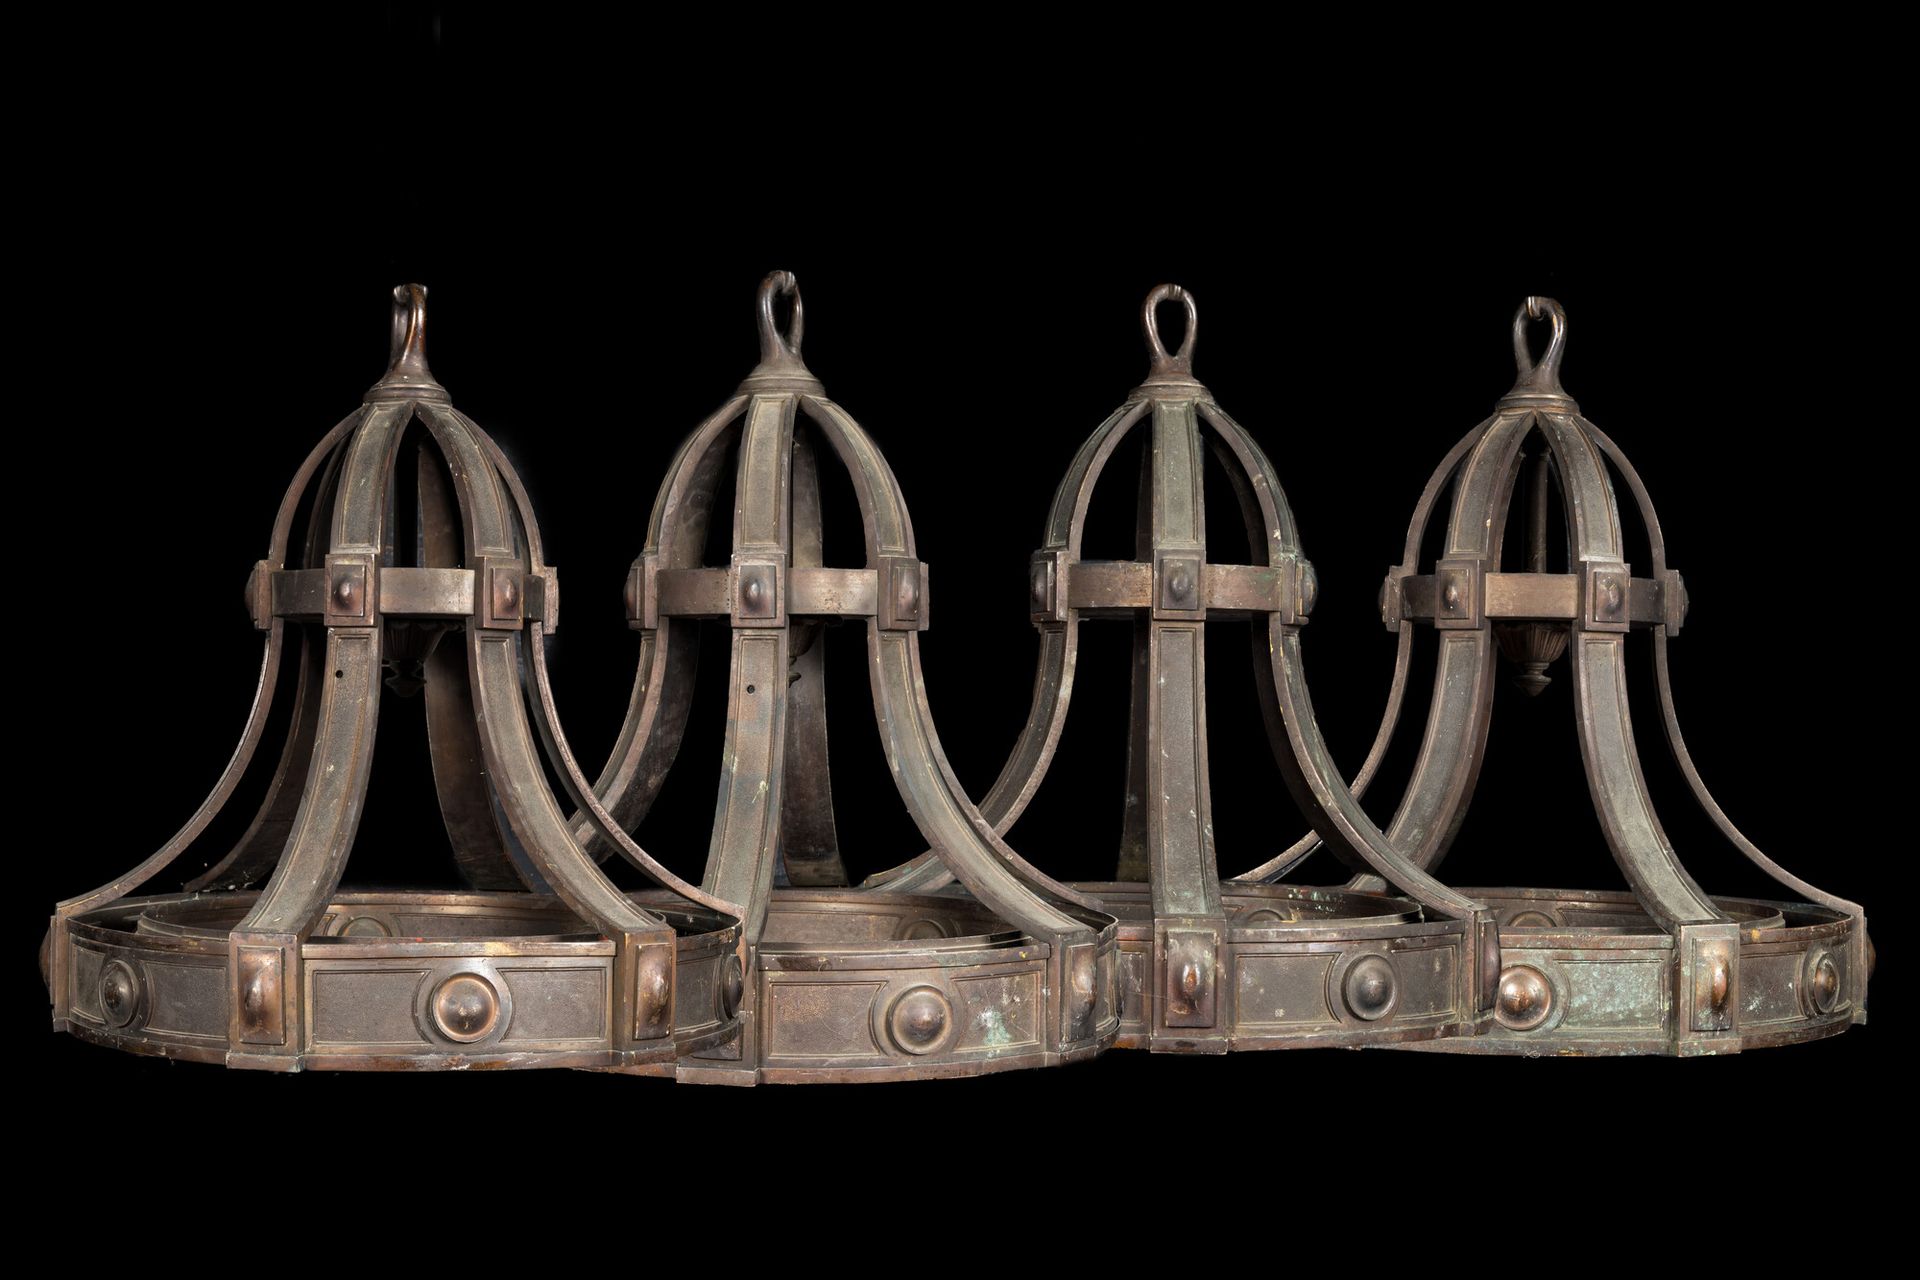 Four large bell-shaped bronze chandeliers, first half 20th C. Full title: Four l&hellip;